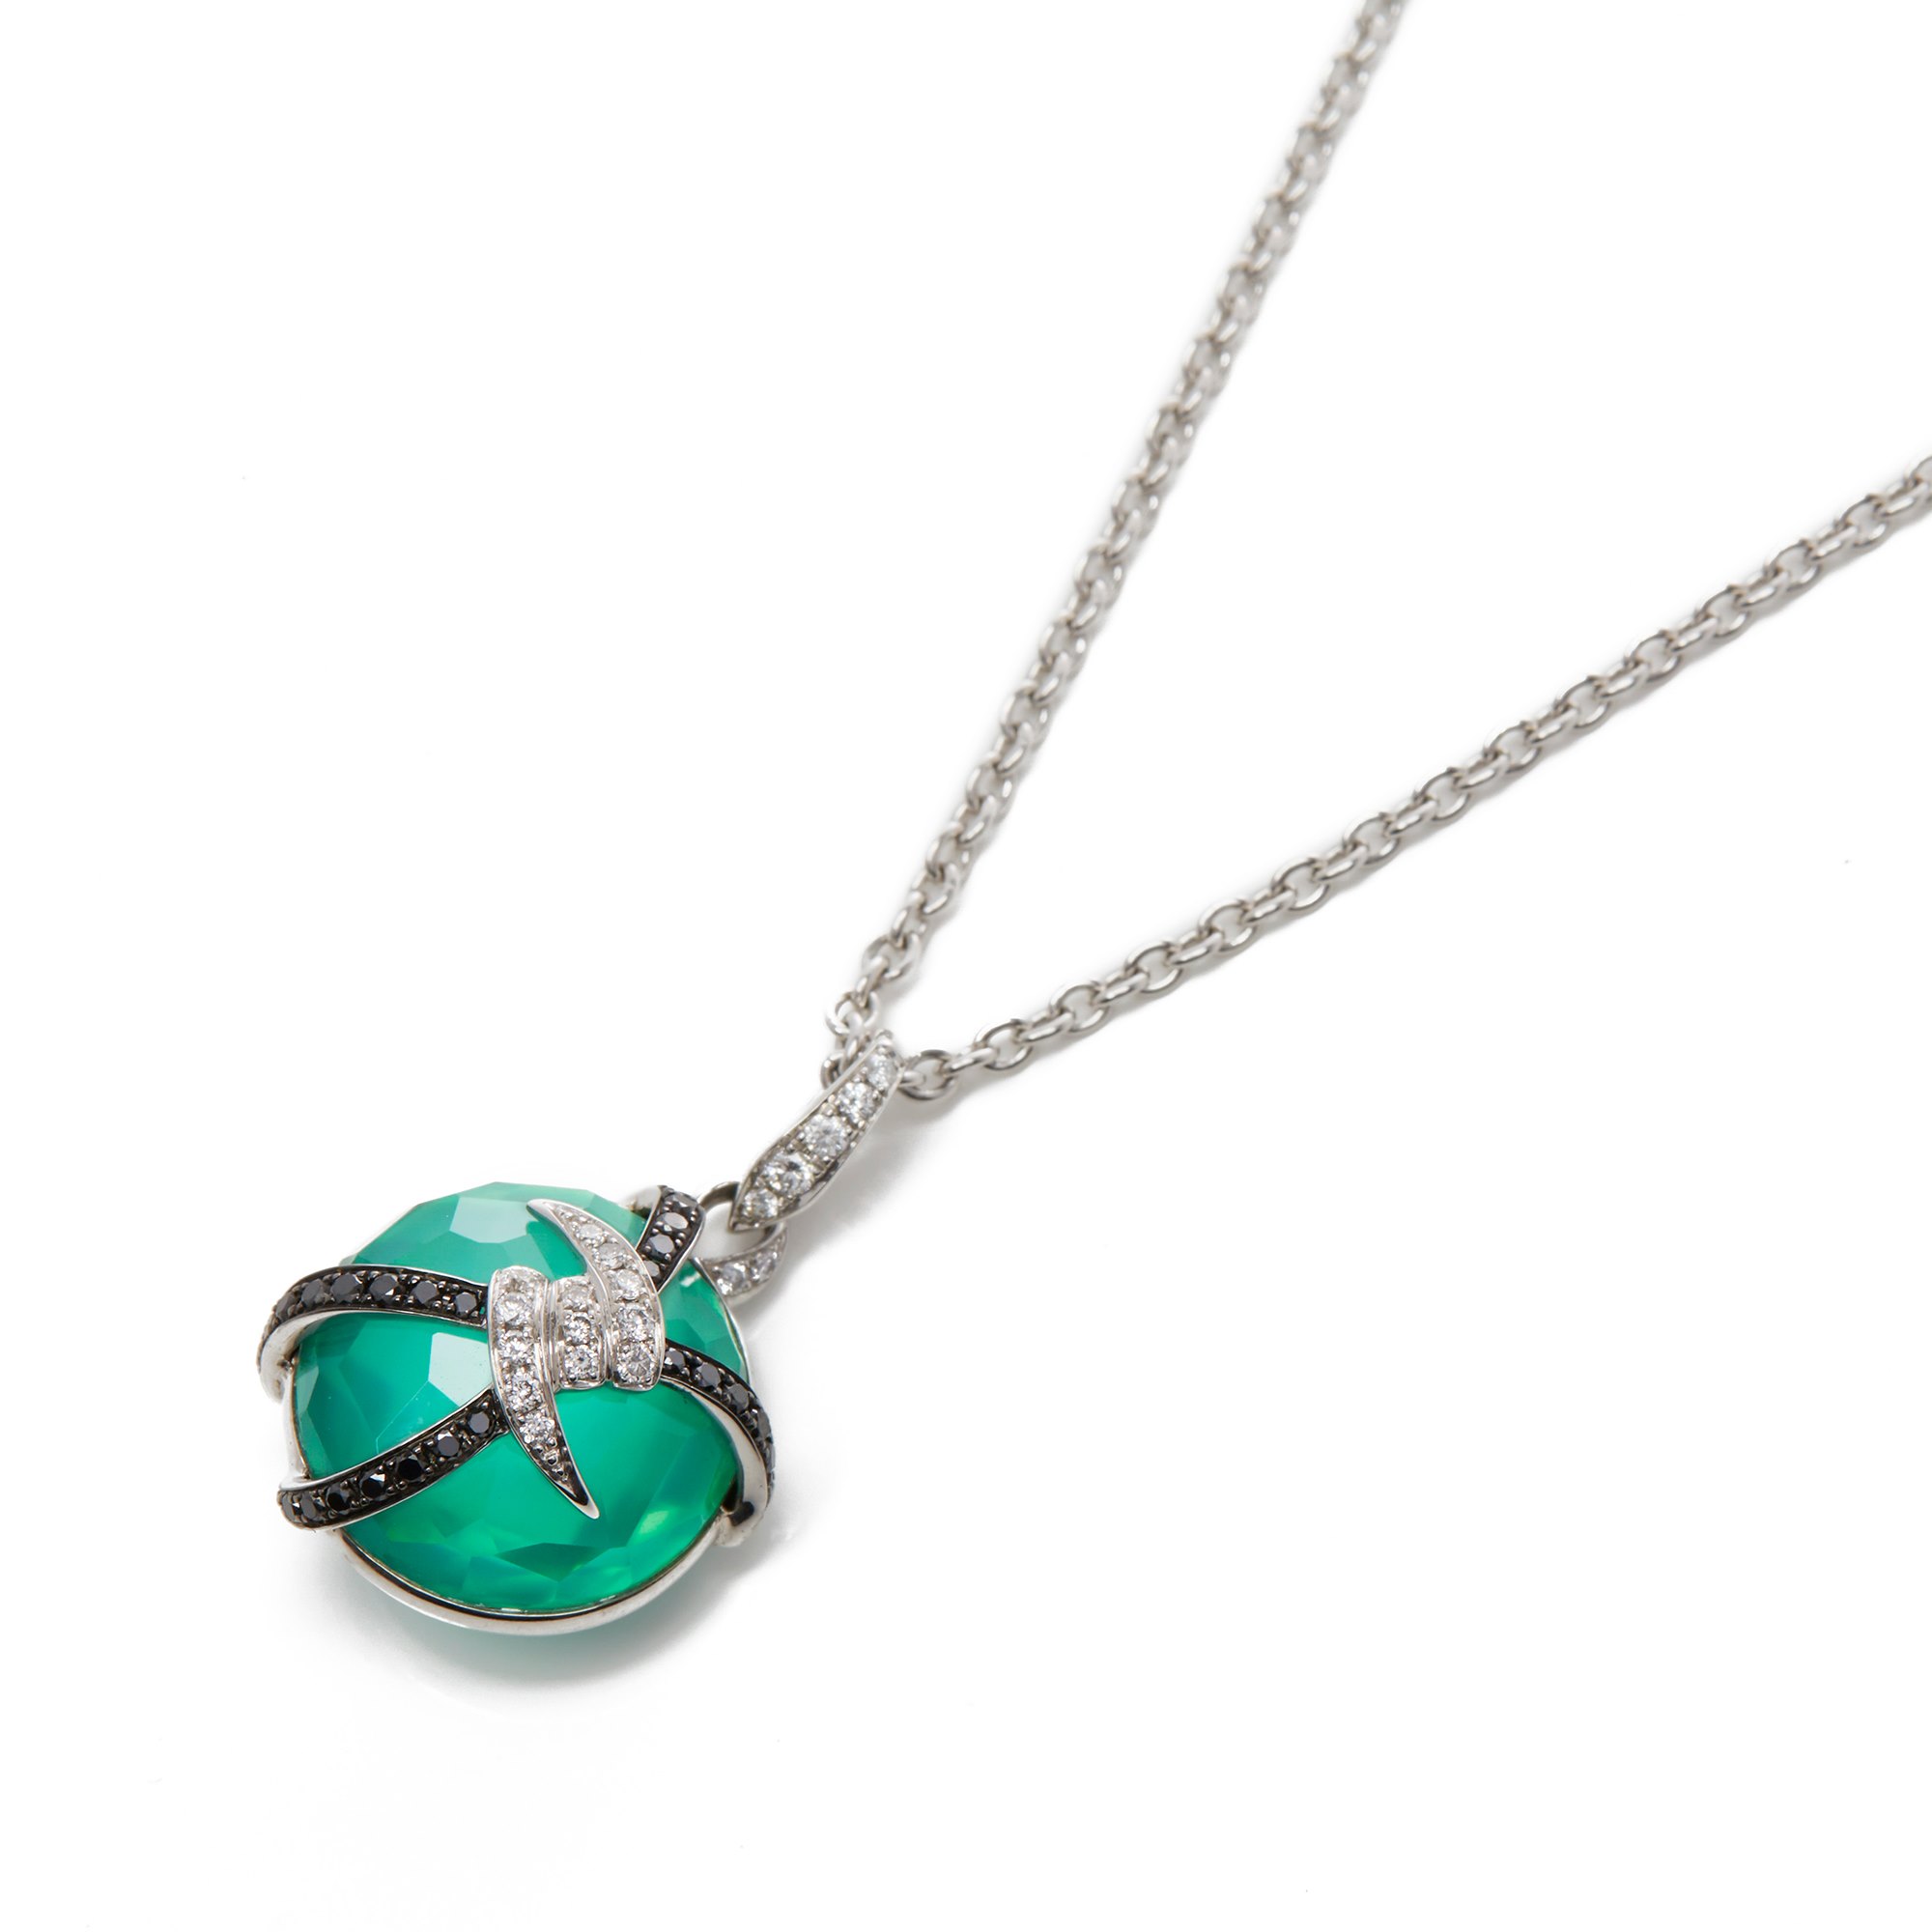 Stephen Webster Forget Me Not Diamond and Green Agate Necklace